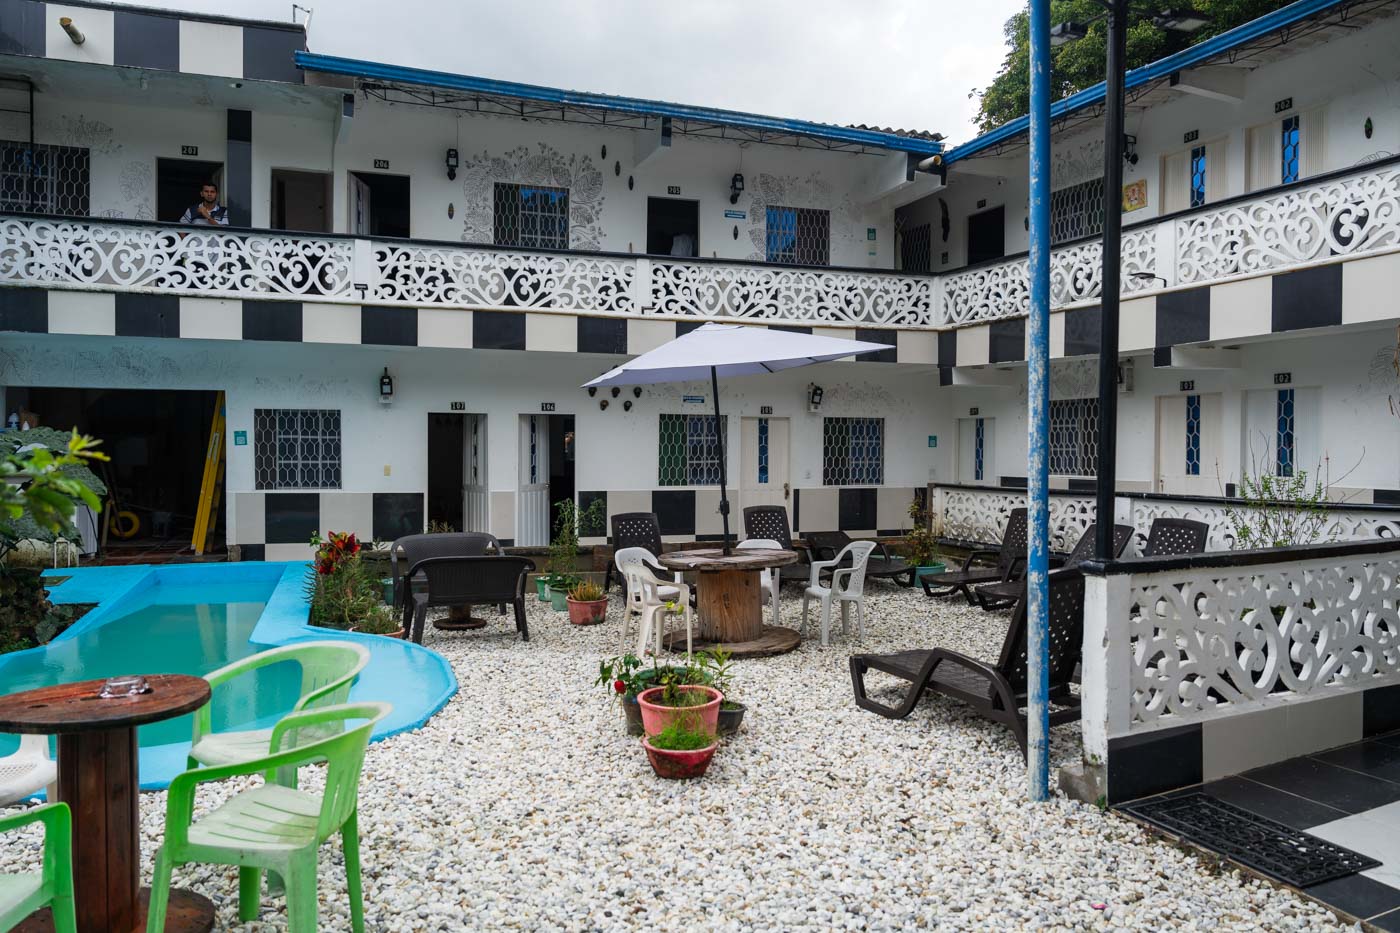 The communal courtyard with deckchairs and a pool at Hotel Minca Express Relax.